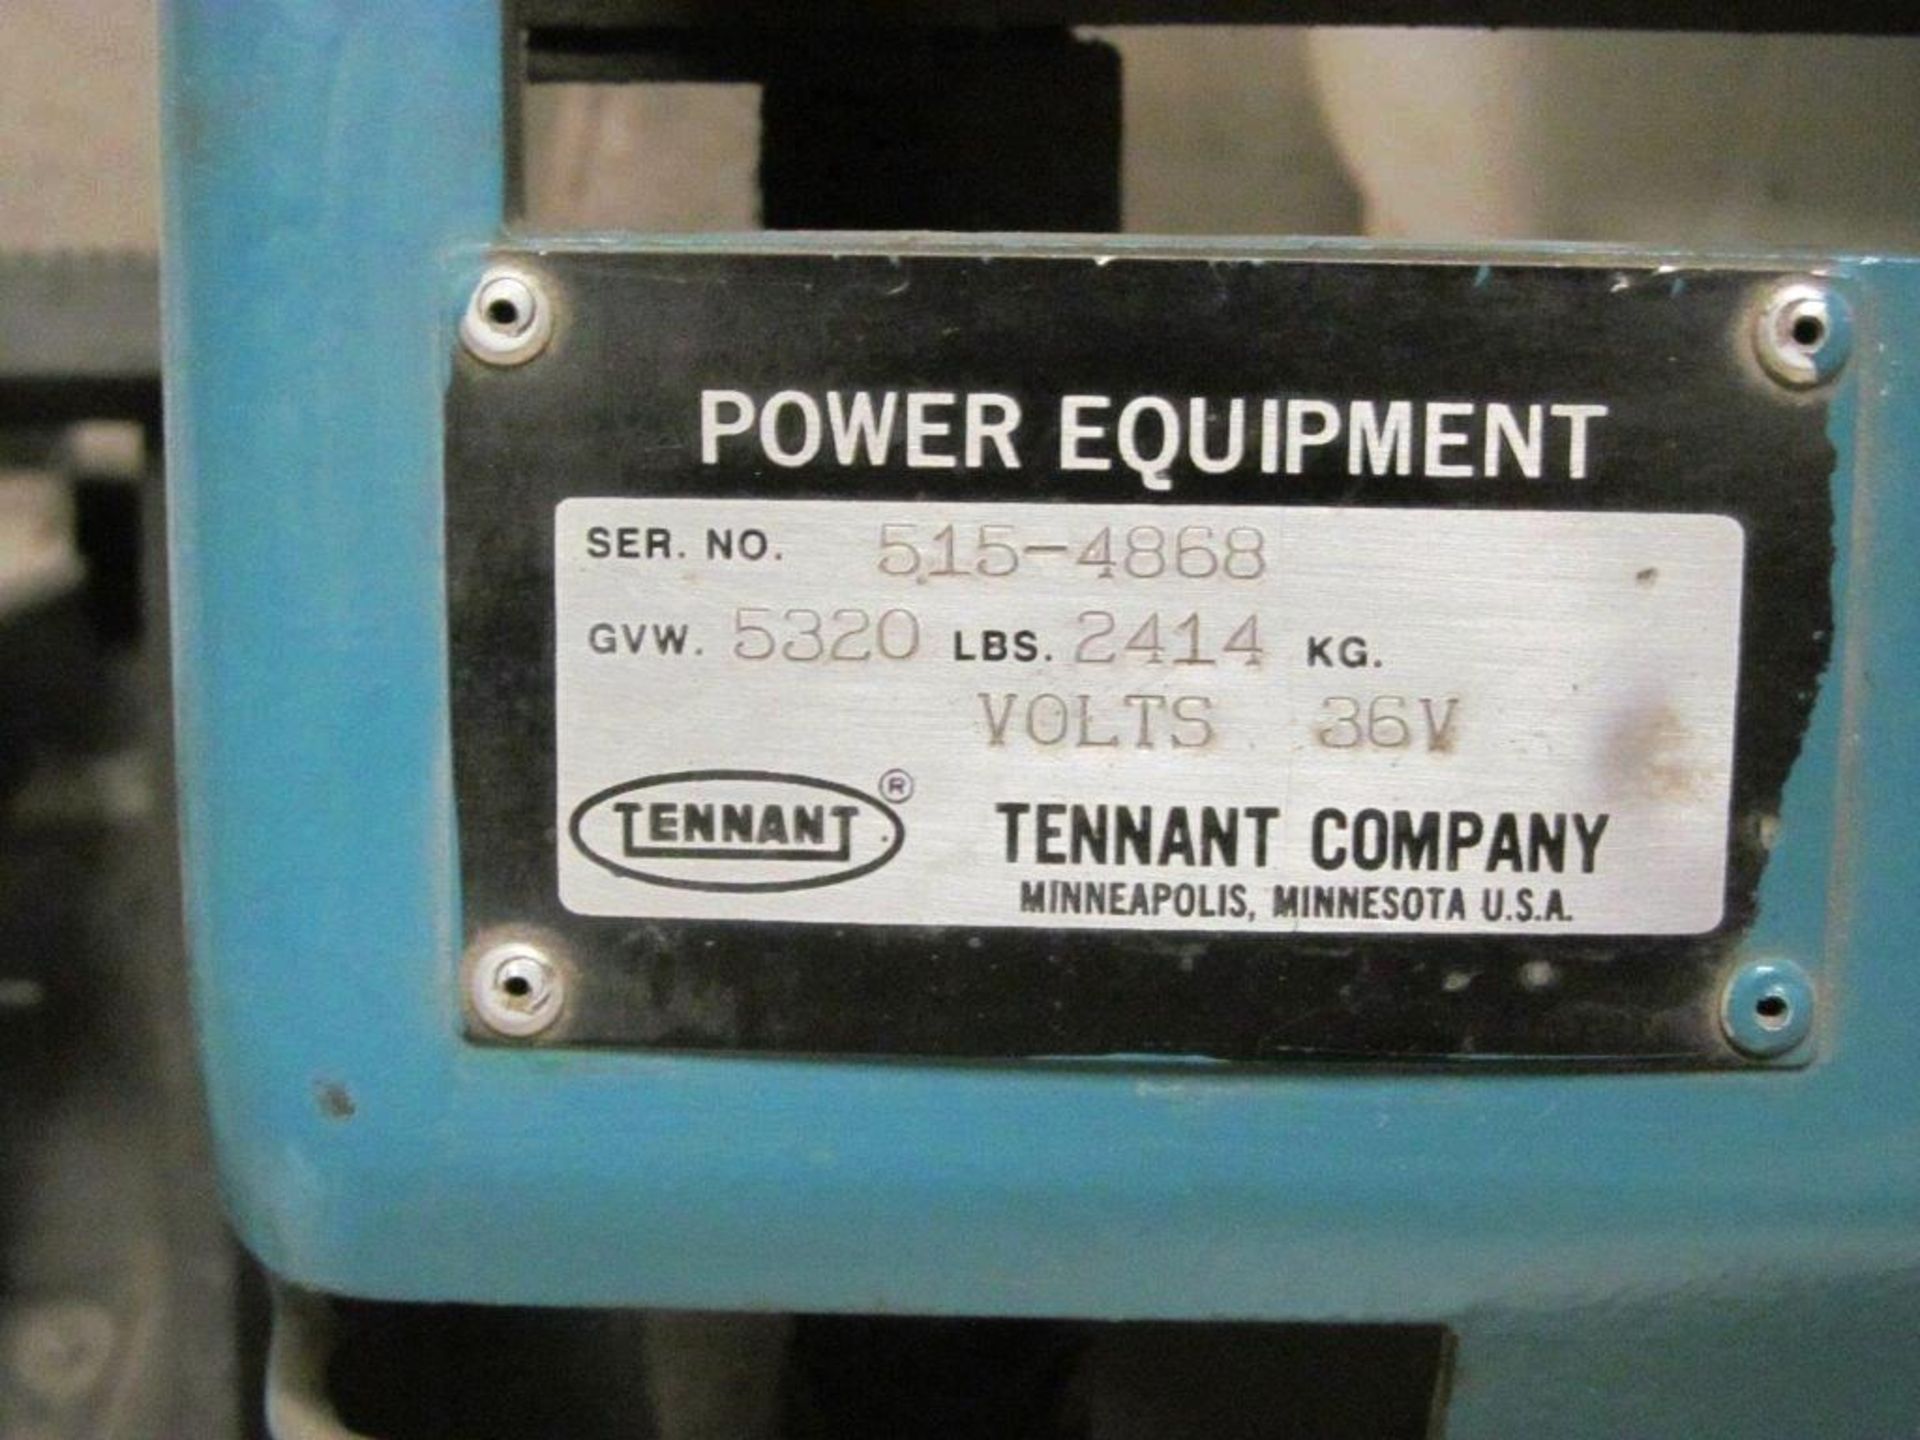 TENNANT FLOOR SWEEPER, ELECTRIC 36V, C/W EXTRA BATTERIES & ACCESSORIES, CONDITION UNKNOWN - Image 8 of 8